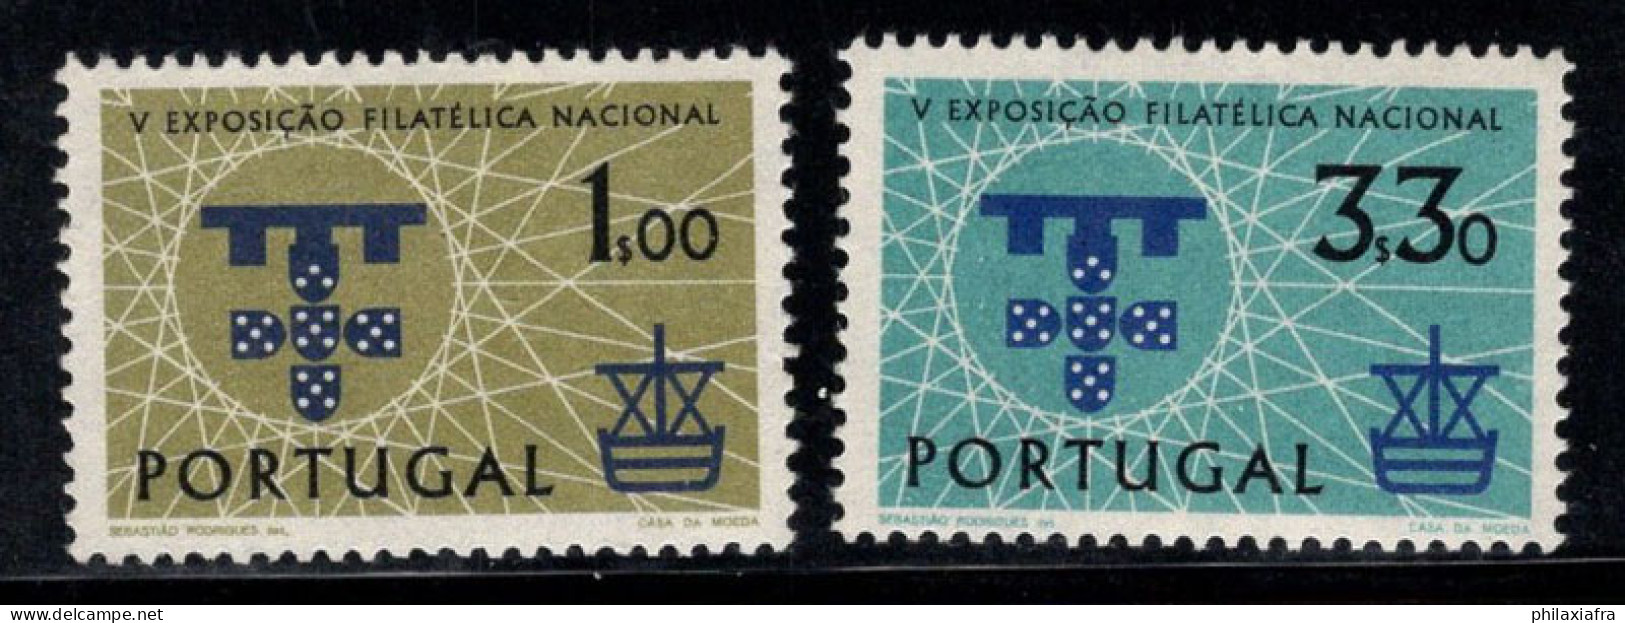 Portugal 1960 Mi. 900-901 Neuf ** 100% Affichage Des Timbres - Unused Stamps